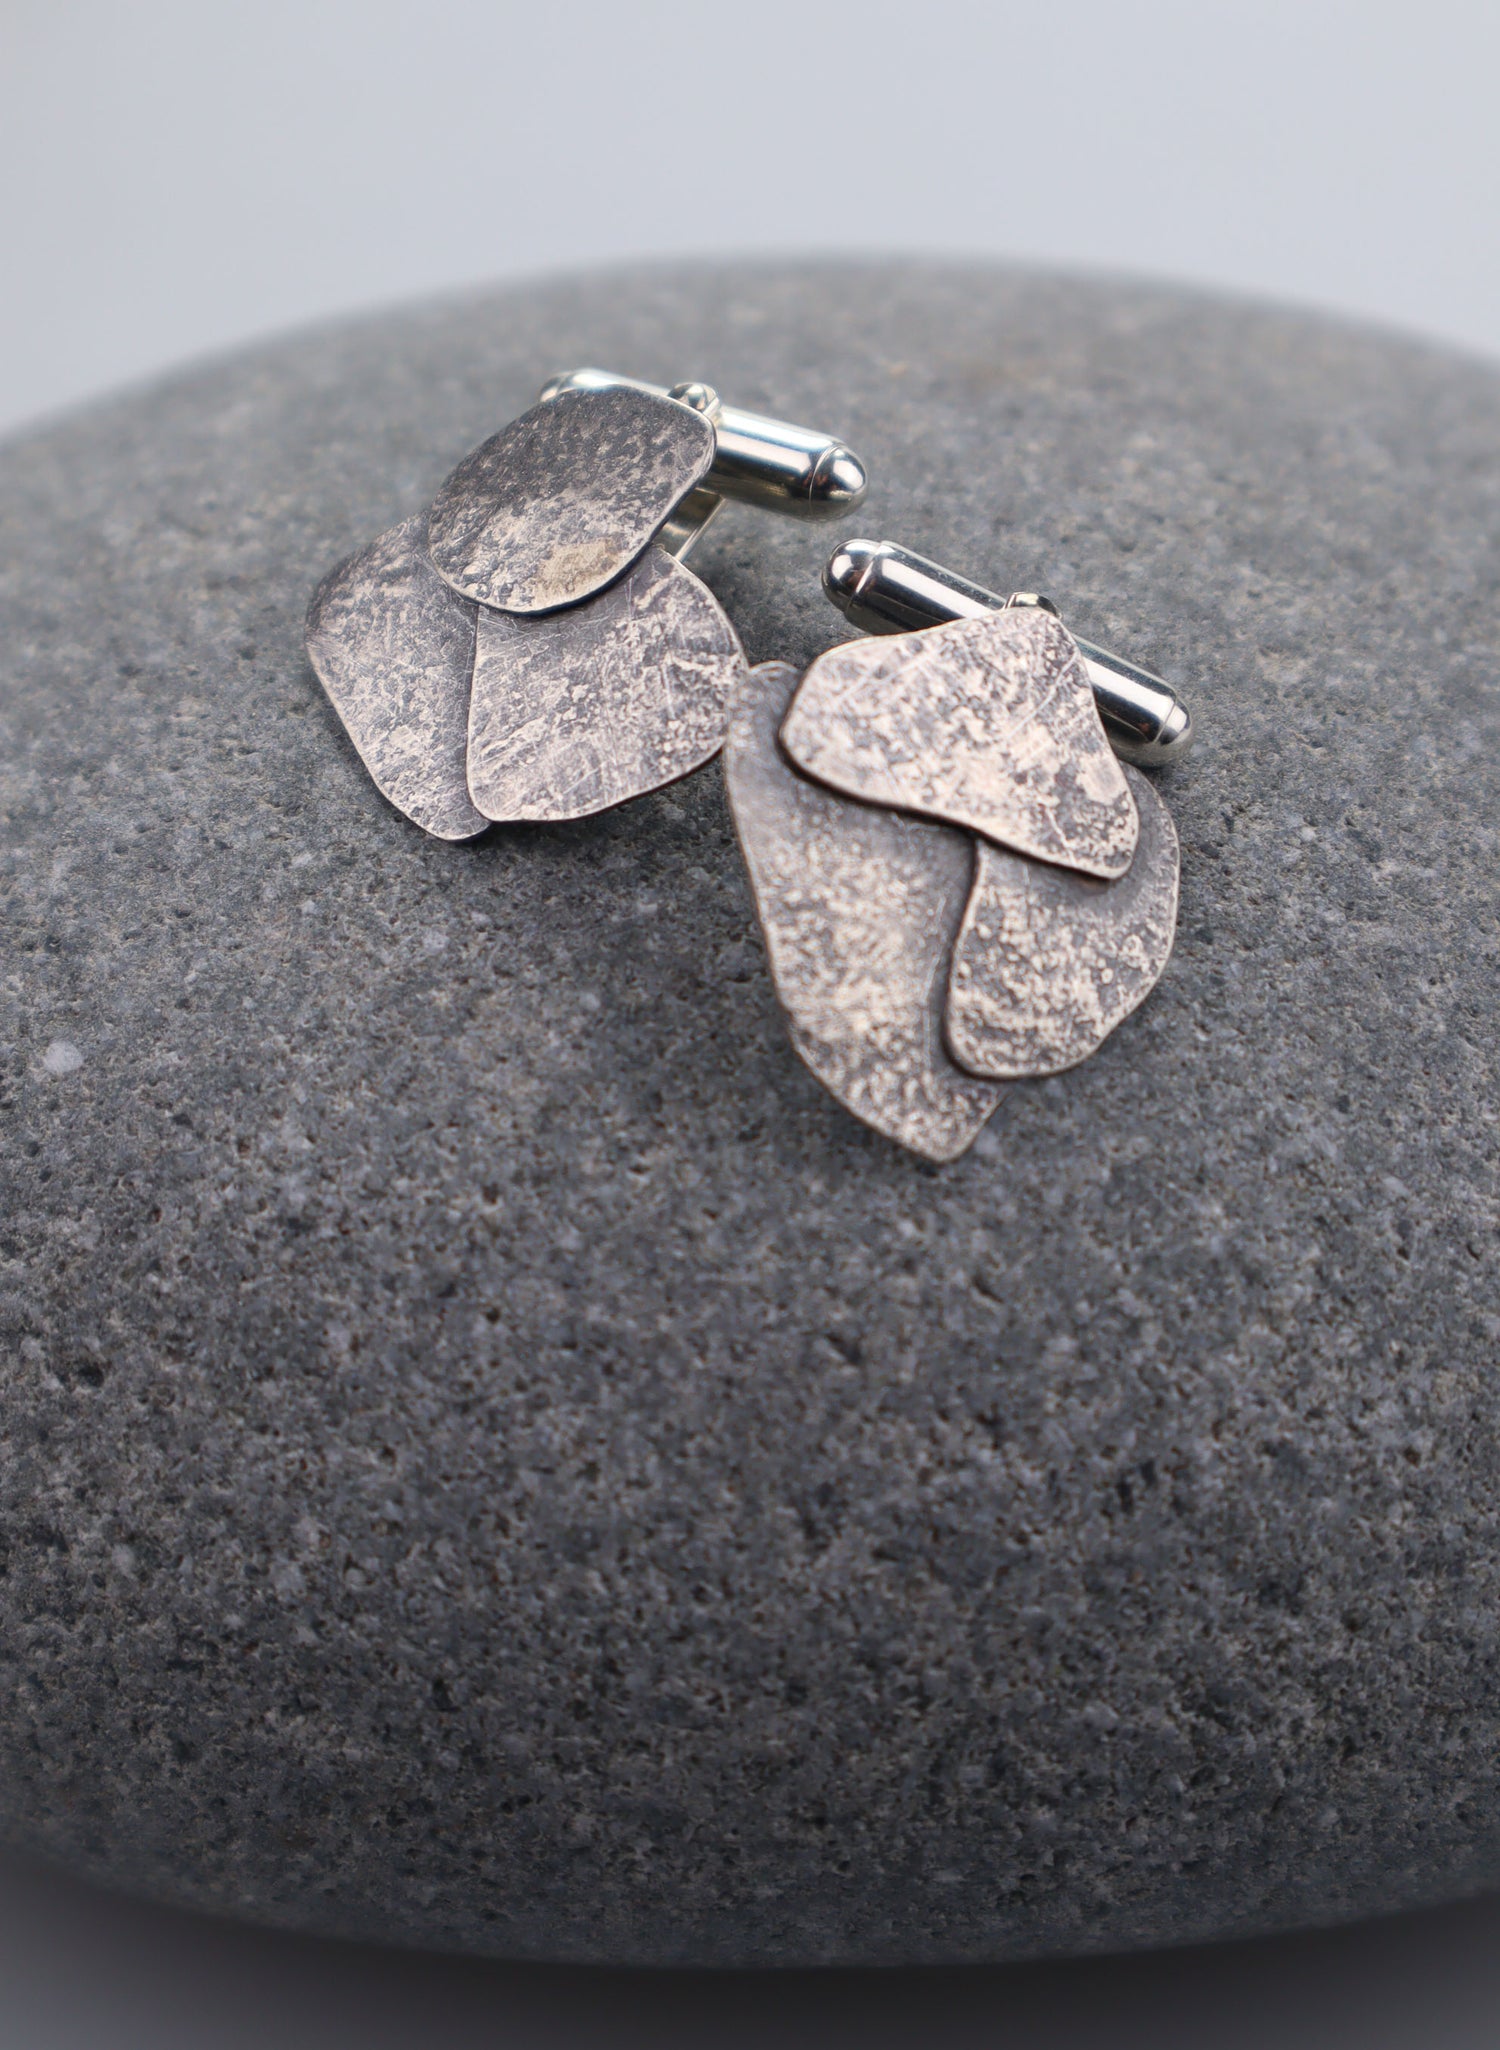 Riverbed Cufflinks - Oxidised Sterling Silver